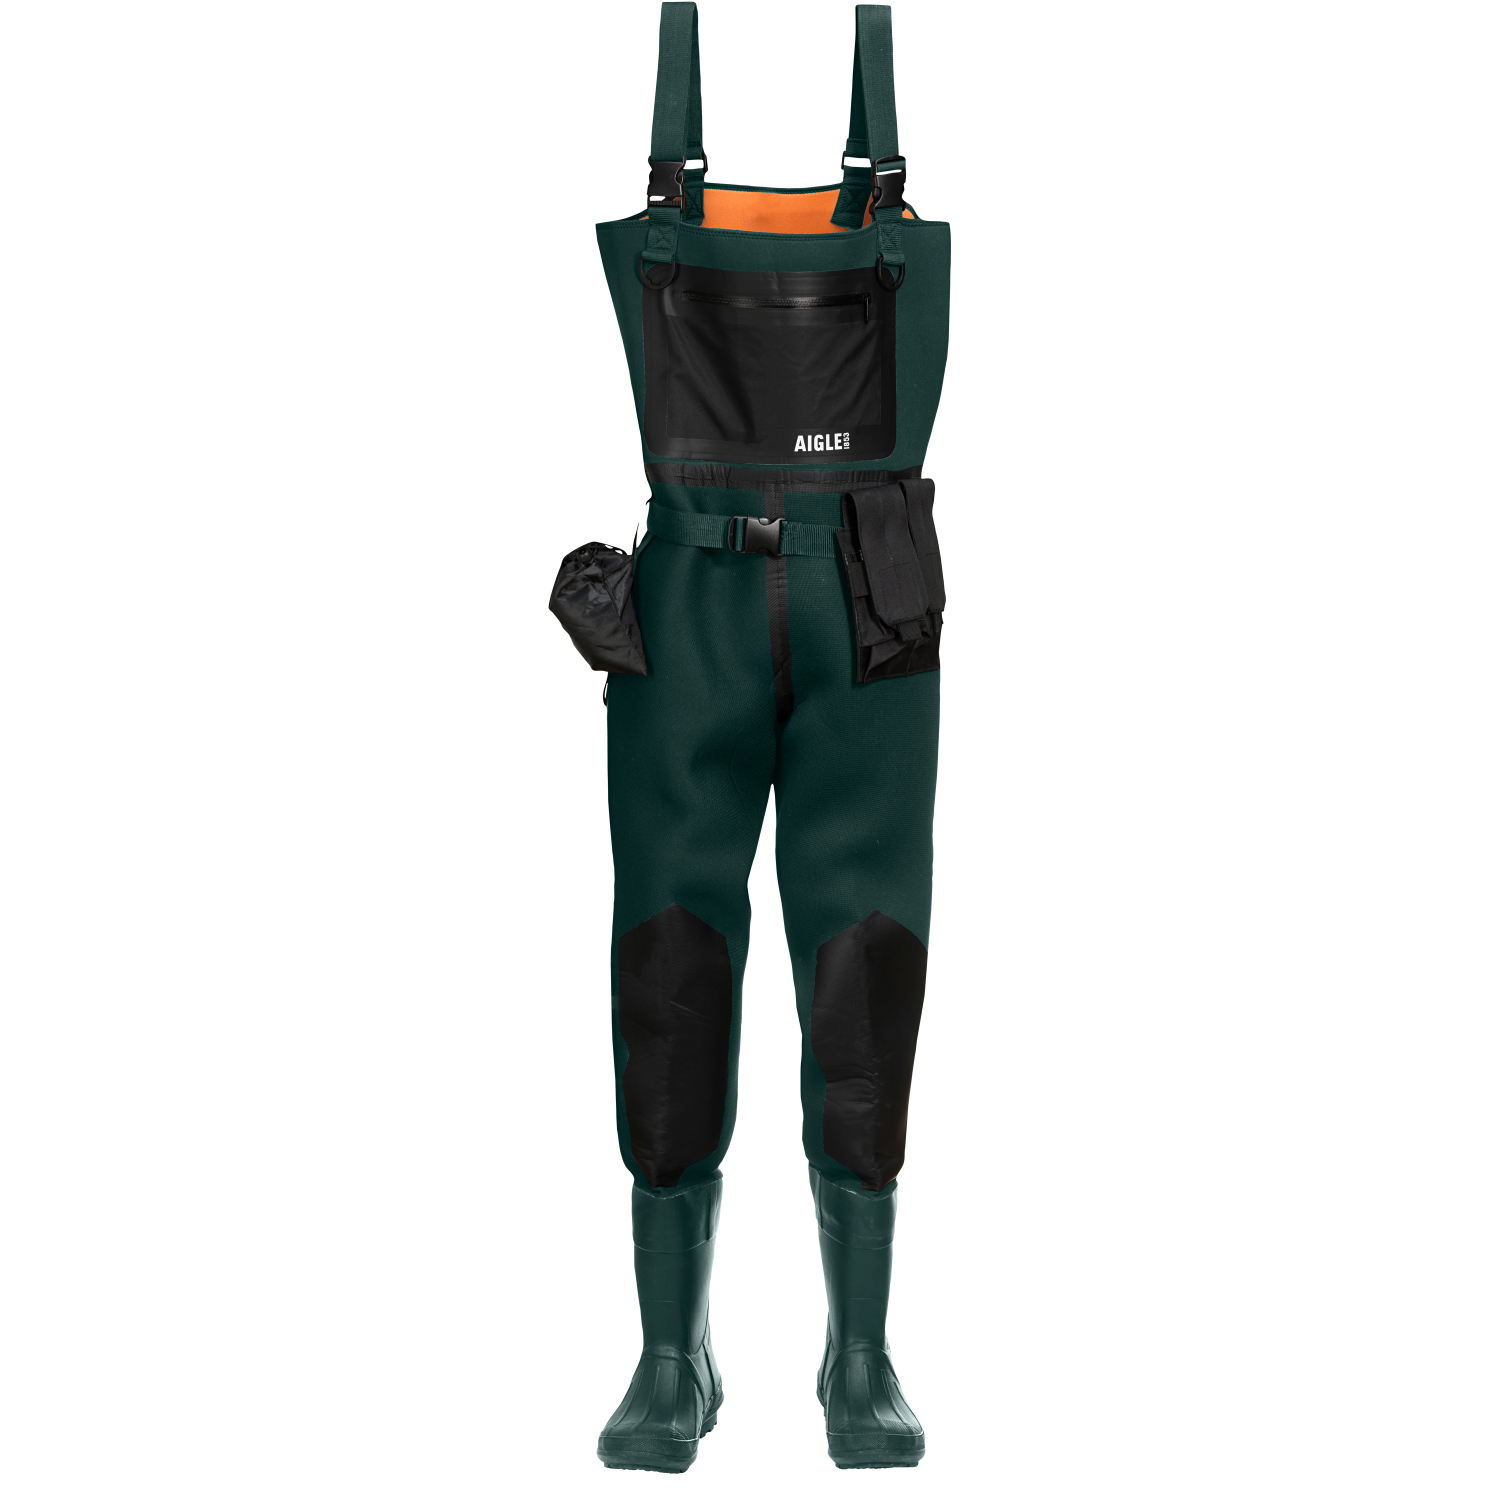 Aigle Mens Waders at low prices